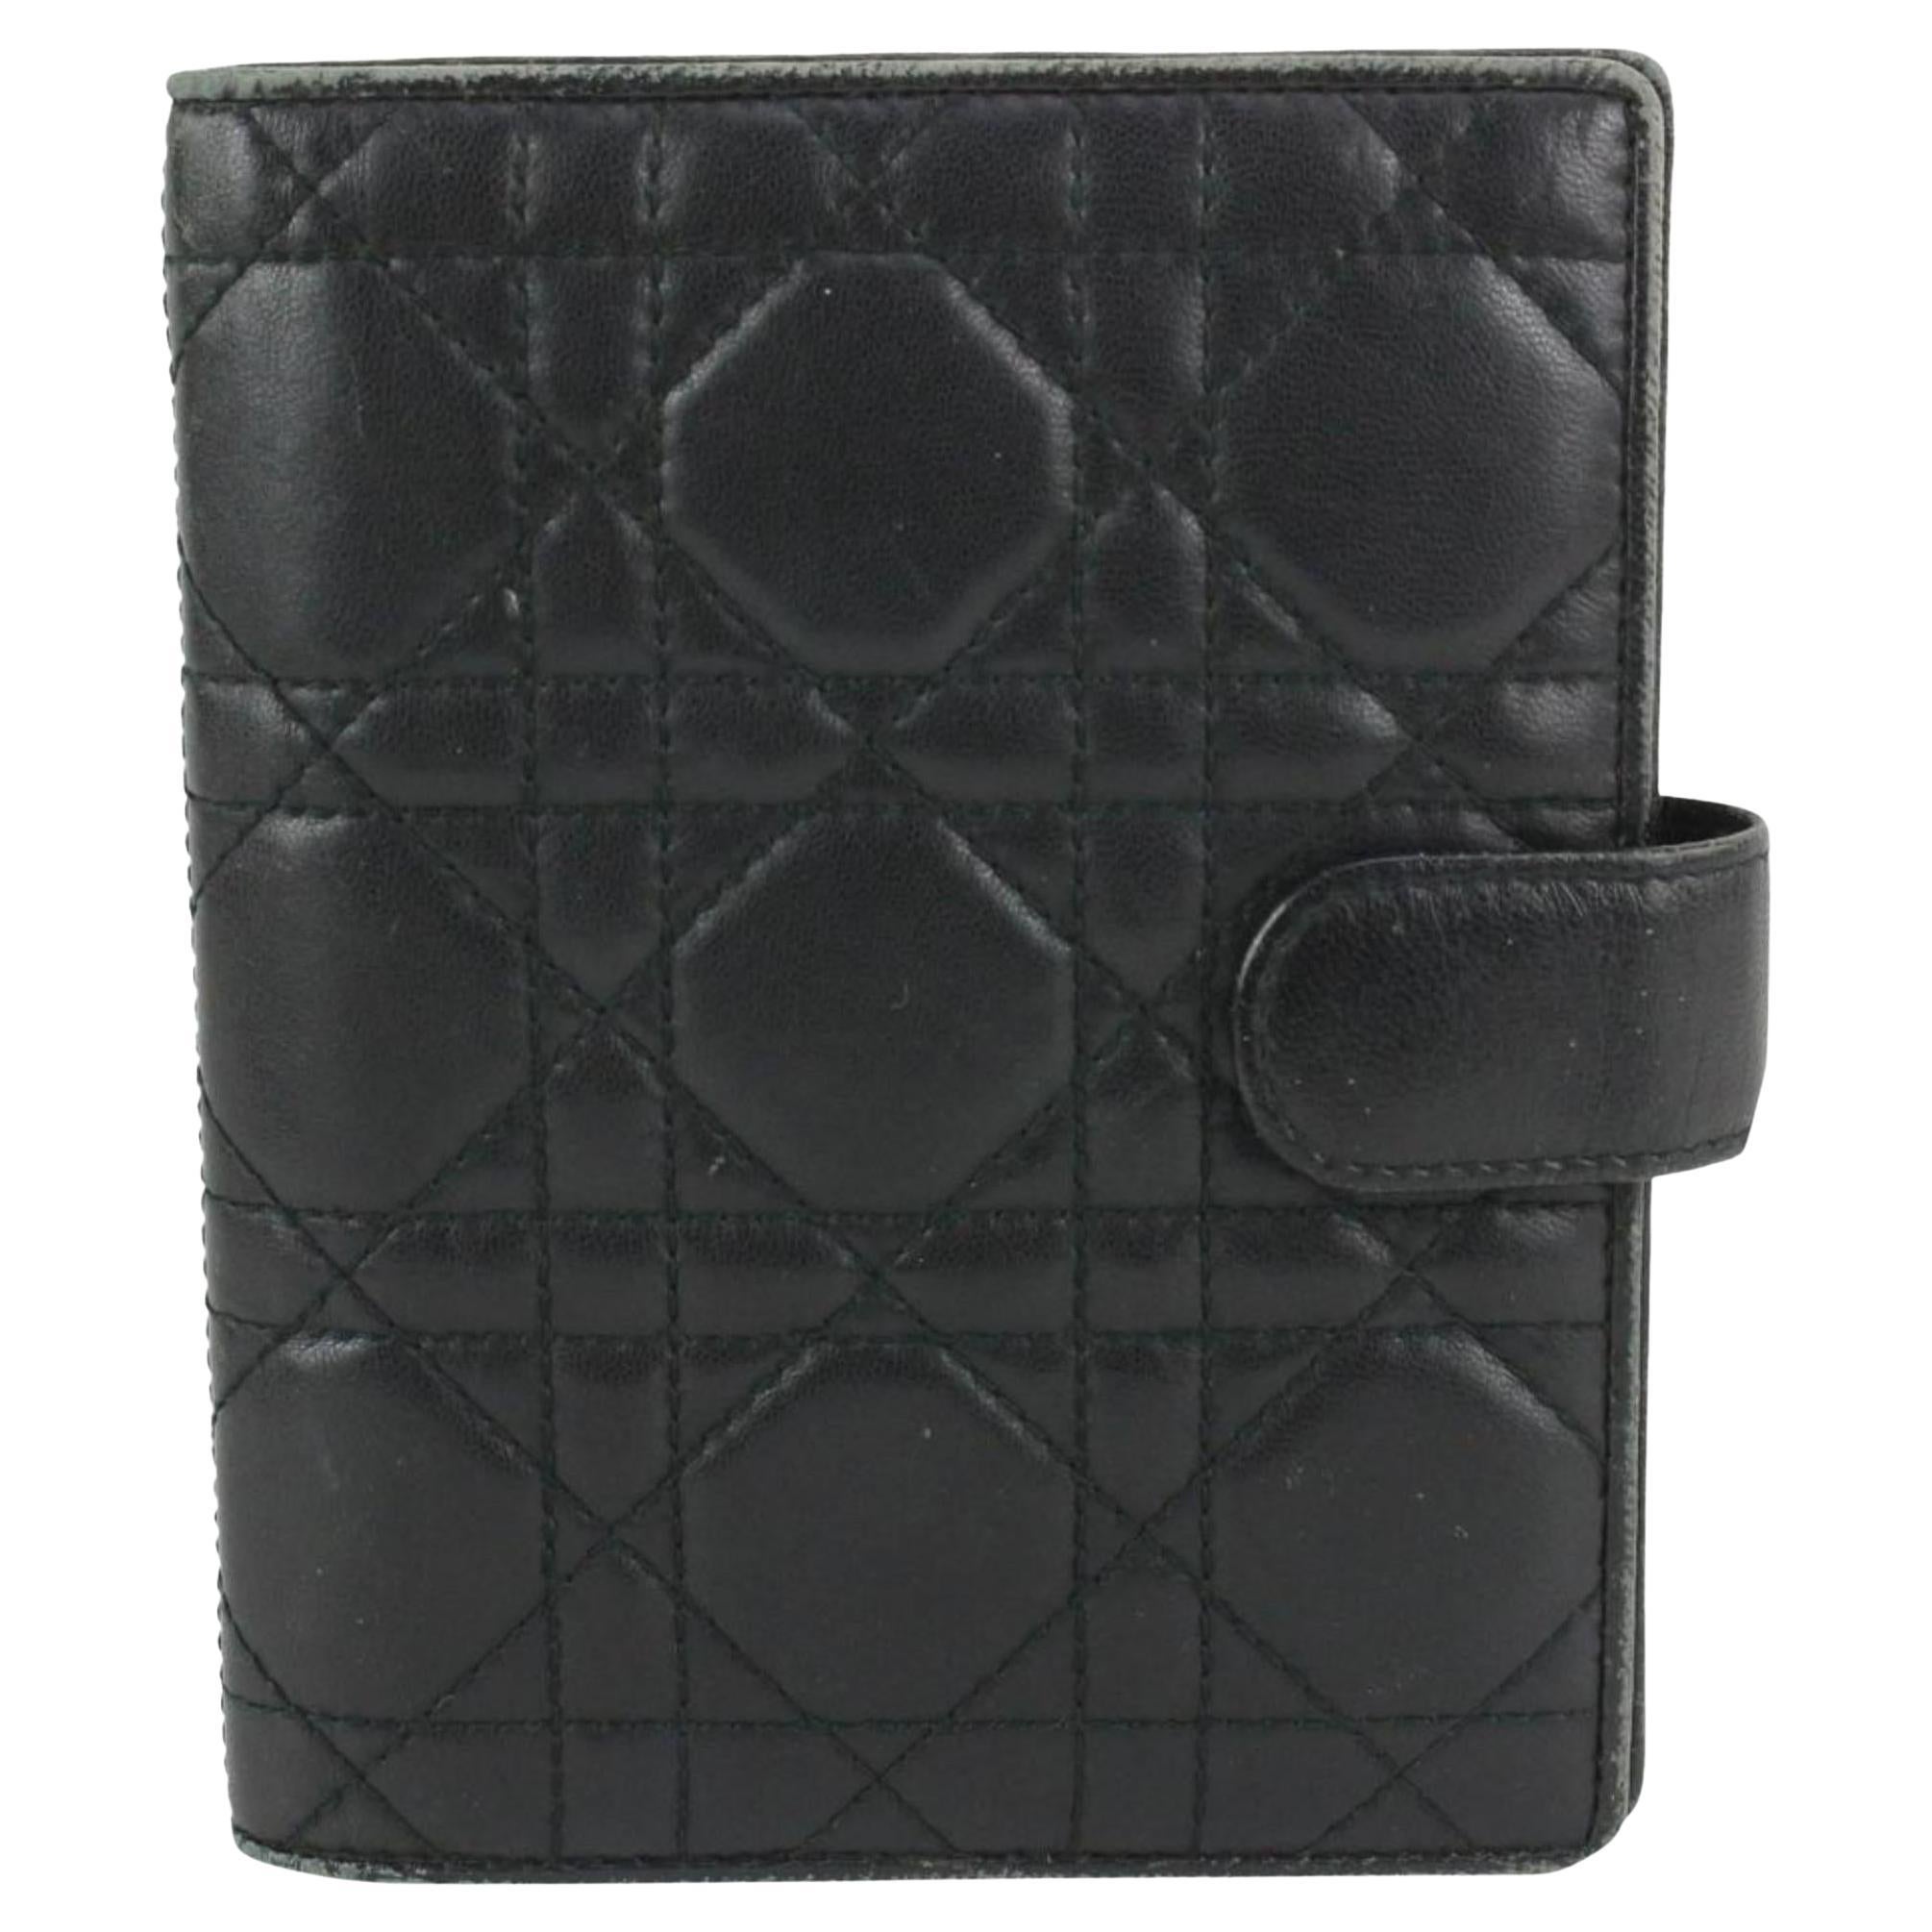 Dior Black Quilted Leather Cannage Small Agenda PM Notebook Cover 923da1 For Sale